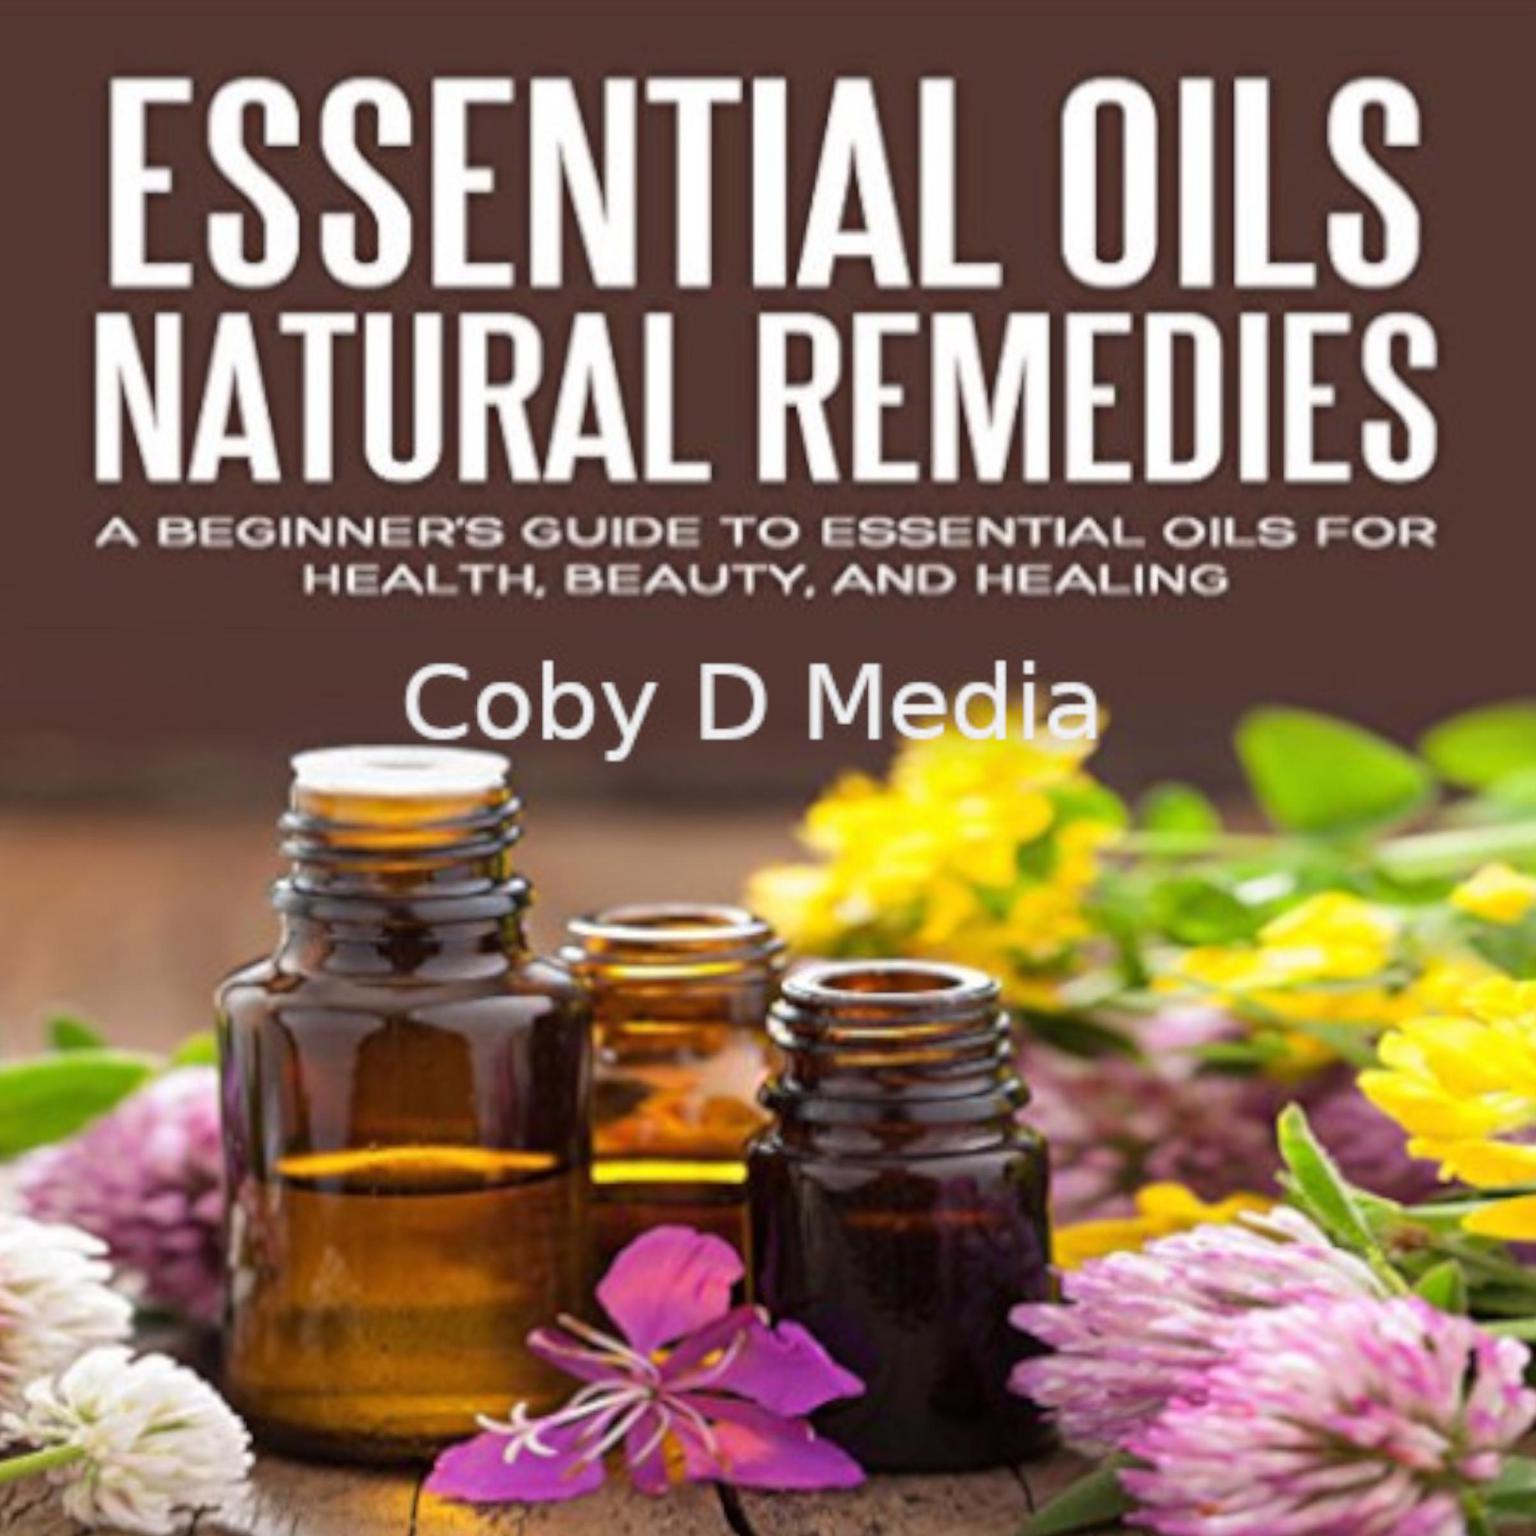 Essential Oils Natural Remedies: A Beginner’s Guide to Essential Oils for Health, Beauty, and Healing Audiobook, by Coby D Media